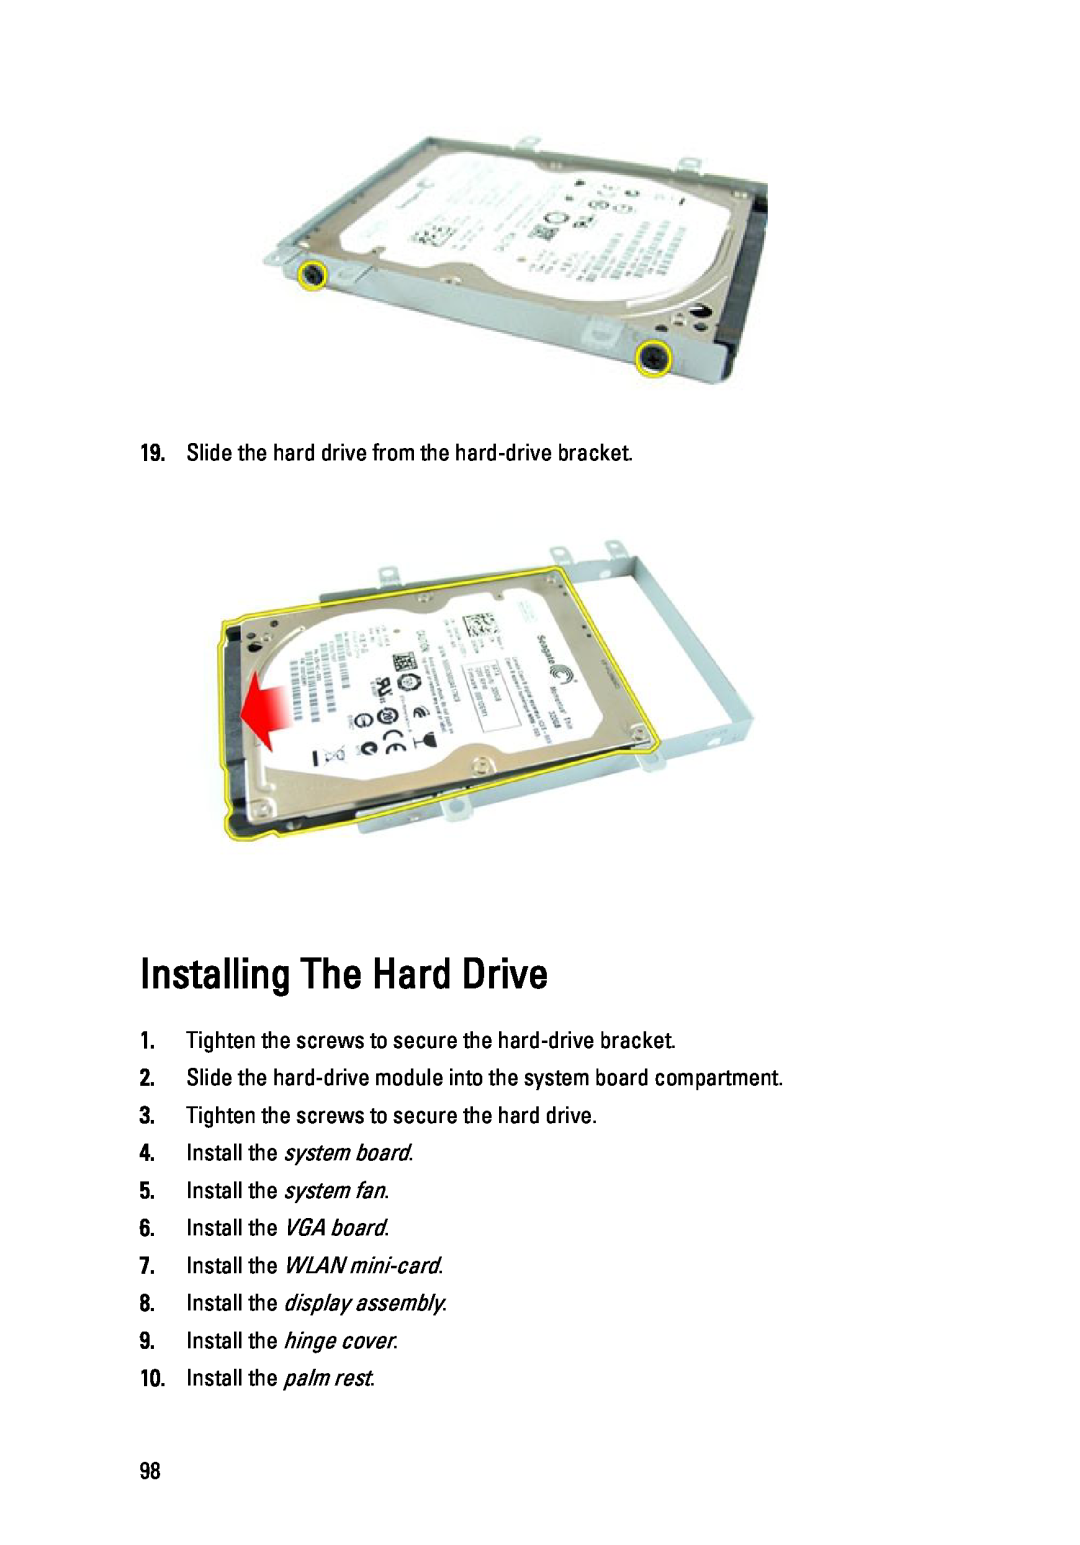 Dell 3450 owner manual Installing The Hard Drive, Install the WLAN mini-card 8. Install the display assembly 